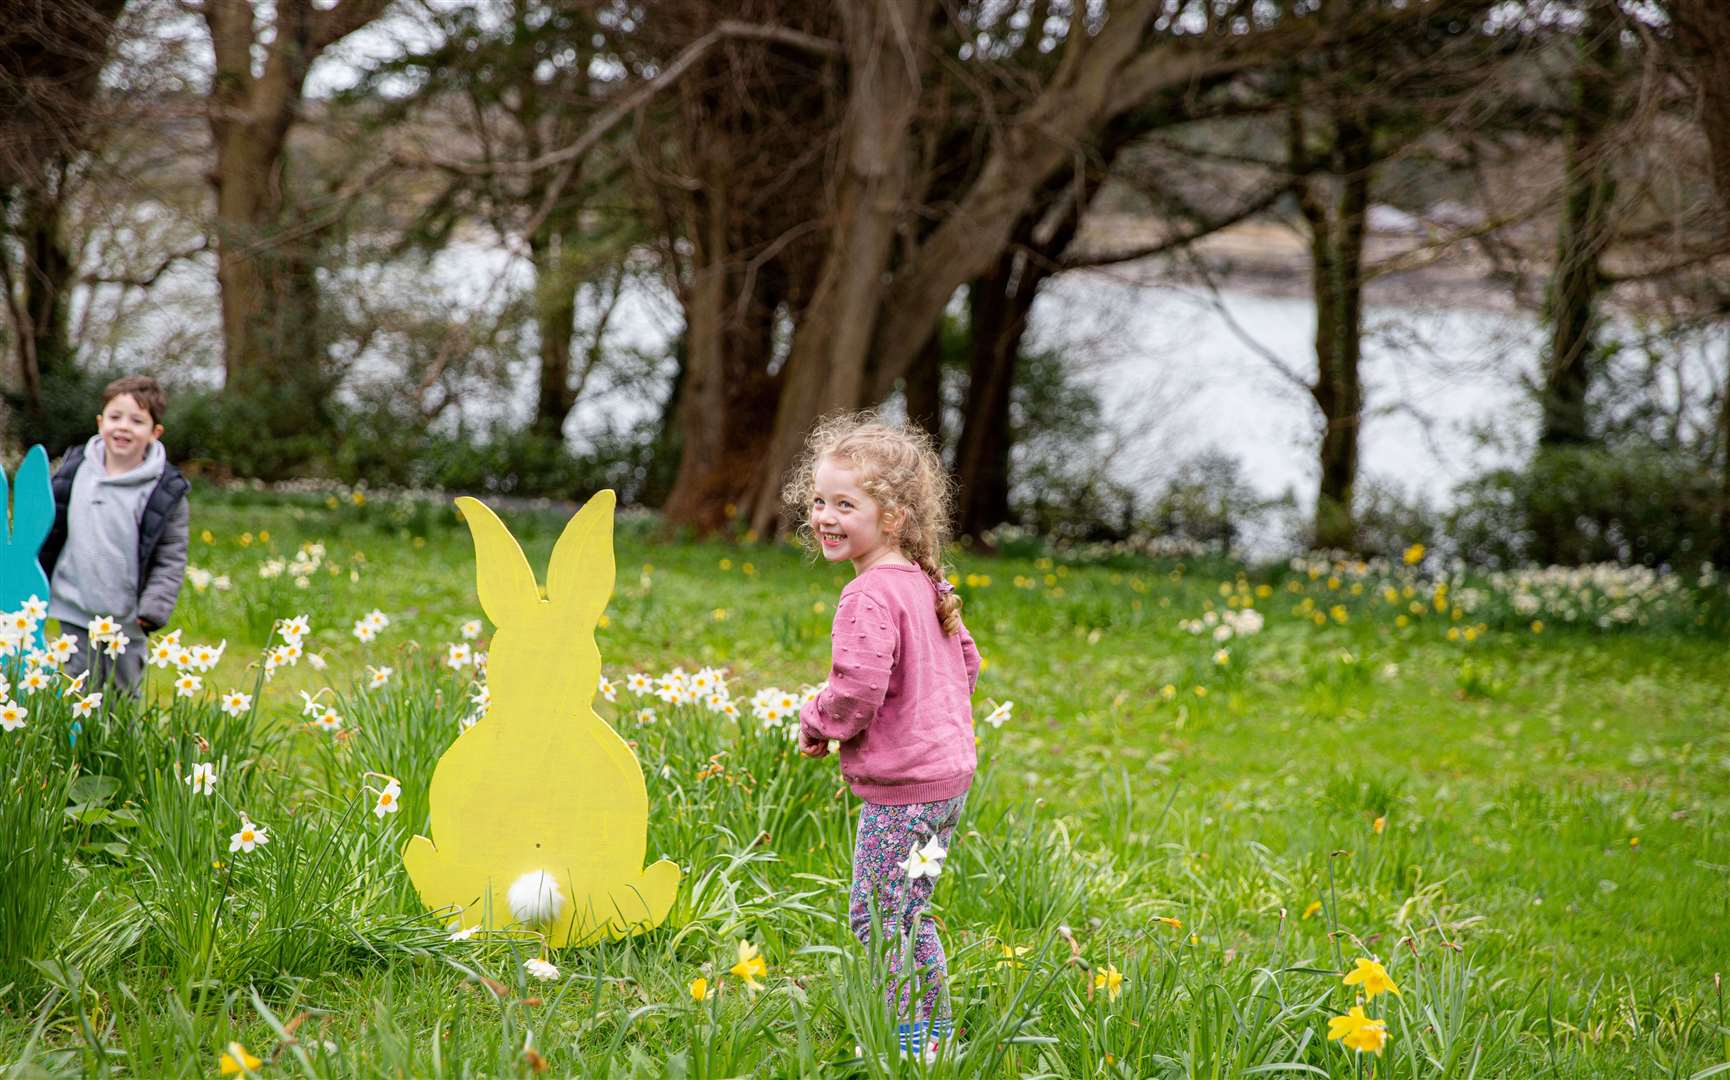 Follow the rabbits around the grounds of Ightham Mote to find the hidden egg. Picture: Megan Taylor